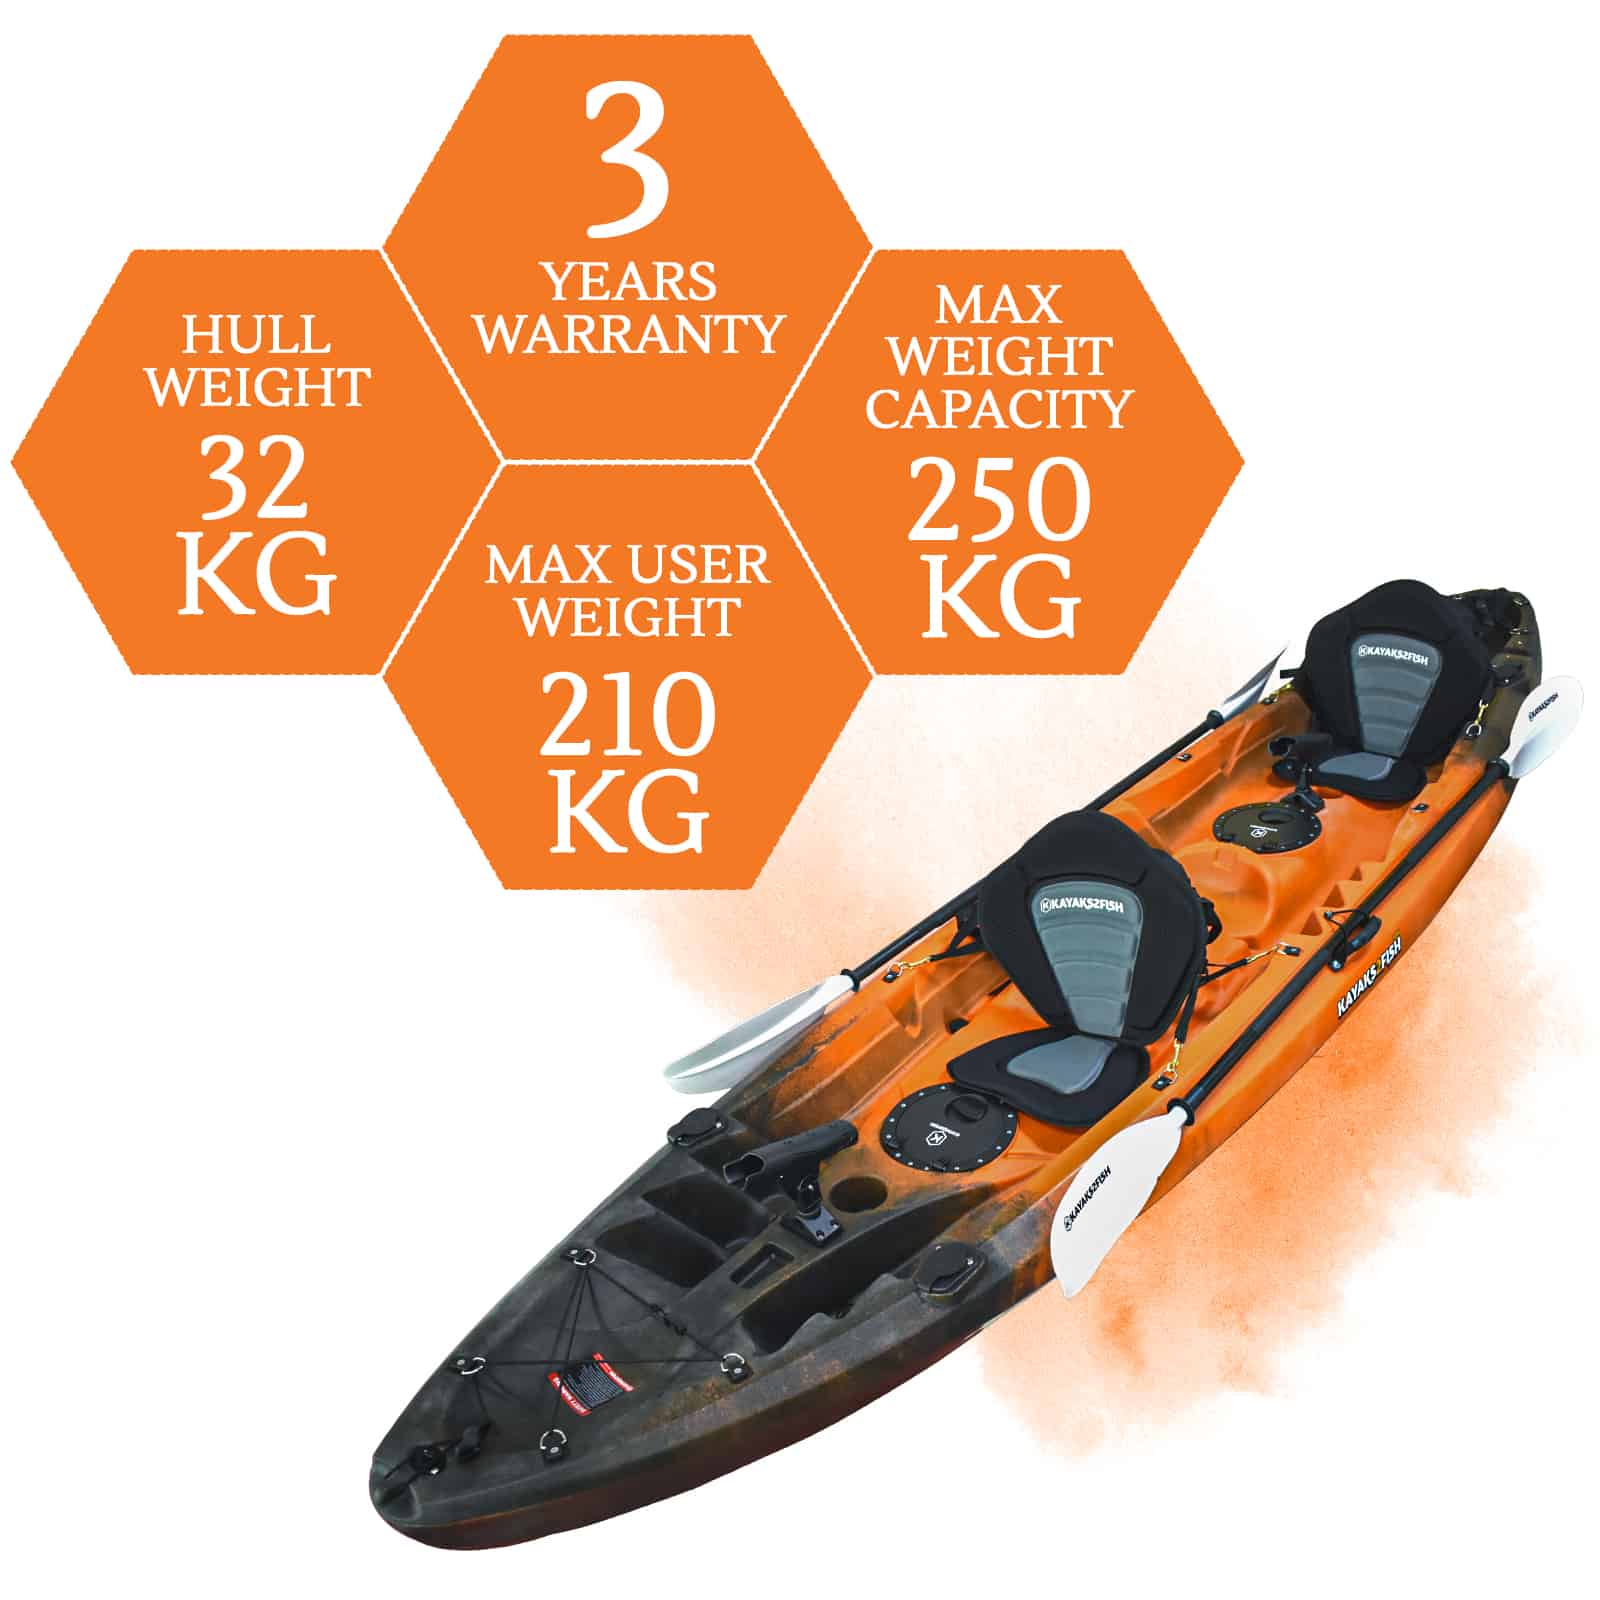 K2F-EAGLE-SUNSET specifications